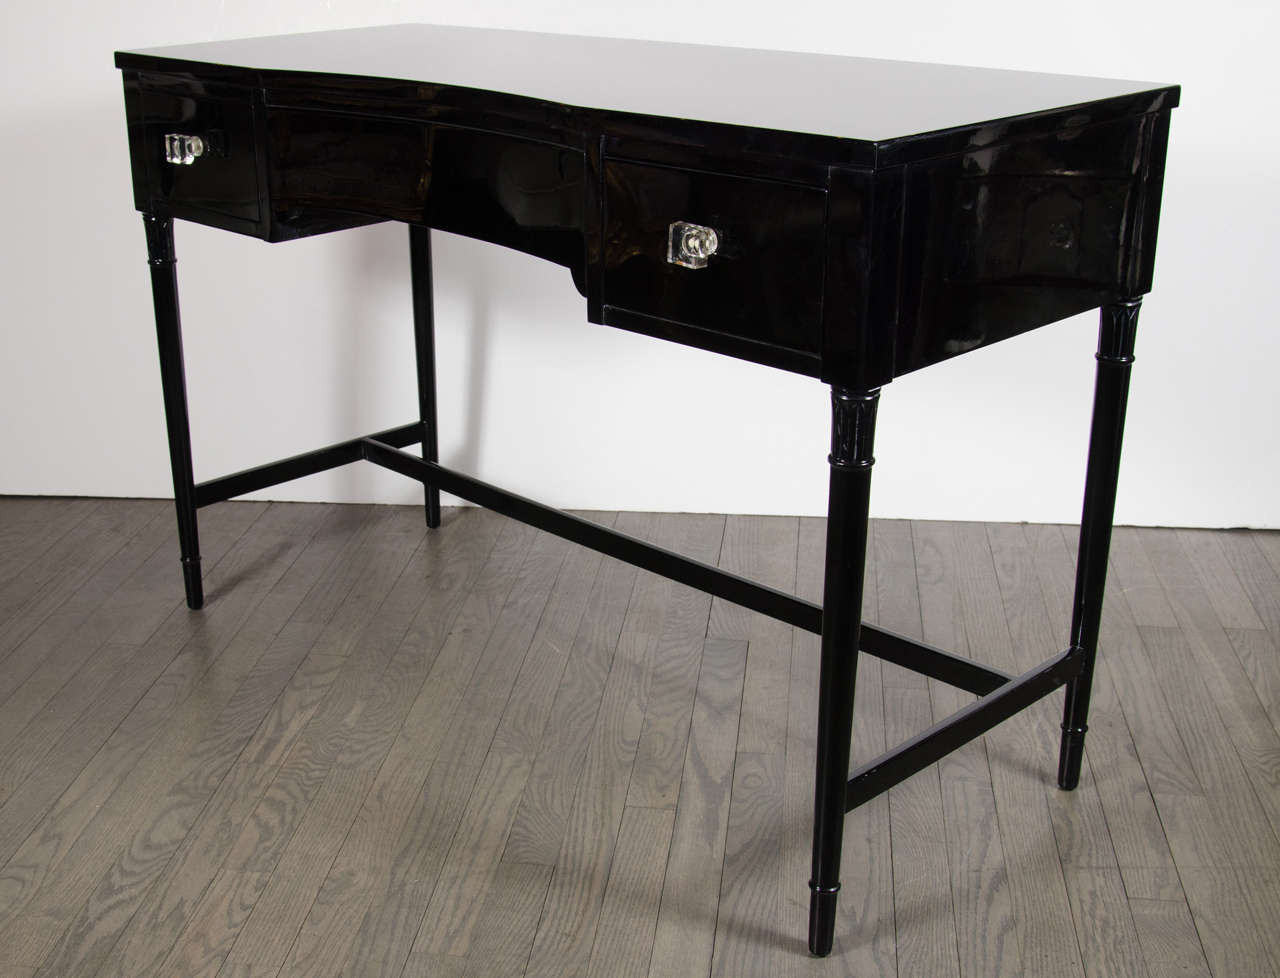 This beautiful 1940s Art Deco three-drawer desk / vanity was realized by the illustrious American maker Grosfeld House- where legendary designers such as Lorin Jackson and Vladimir Kagan- refined their practice. It features an ebonized walnut body